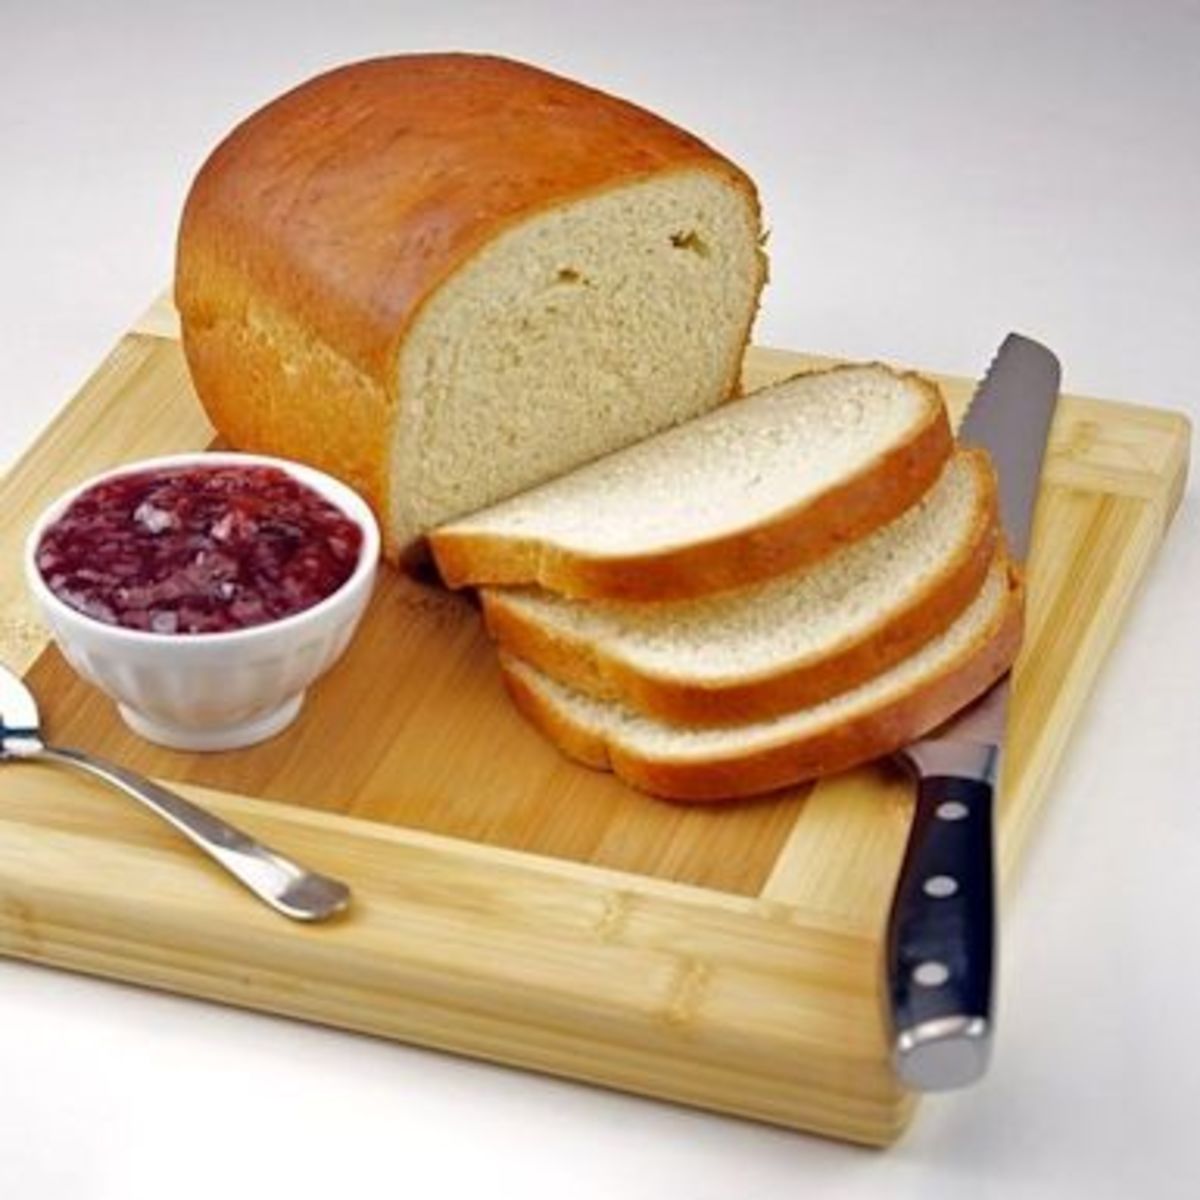 Strawberry jam and bread